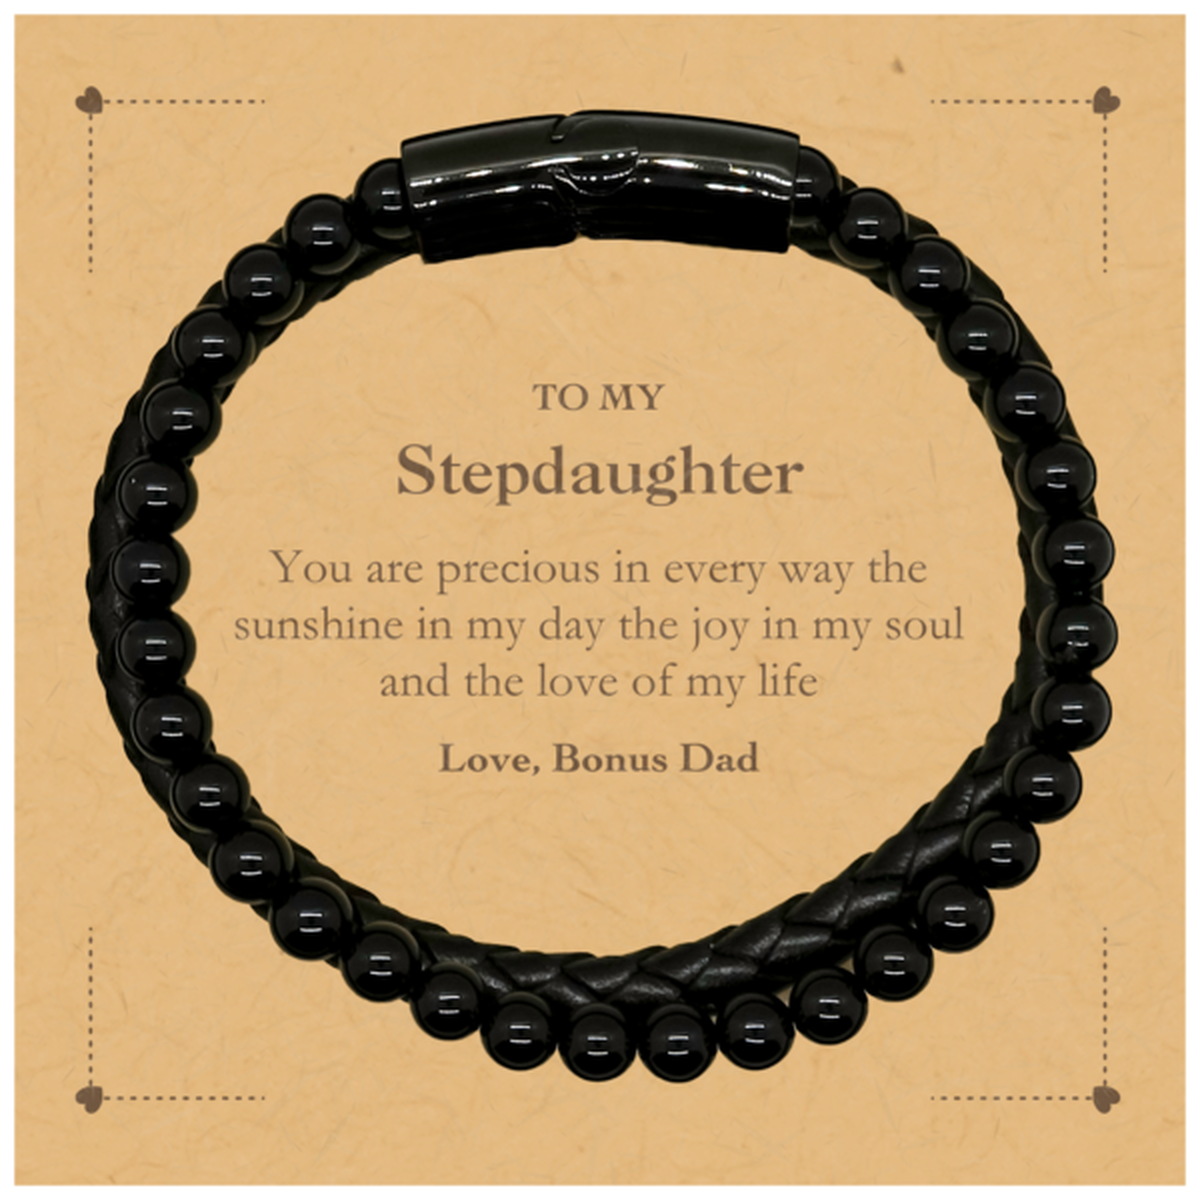 Graduation Gifts for Stepdaughter Stone Leather Bracelets Present from Bonus Dad, Christmas Stepdaughter Birthday Gifts Stepdaughter You are precious in every way the sunshine in my day. Love, Bonus Dad